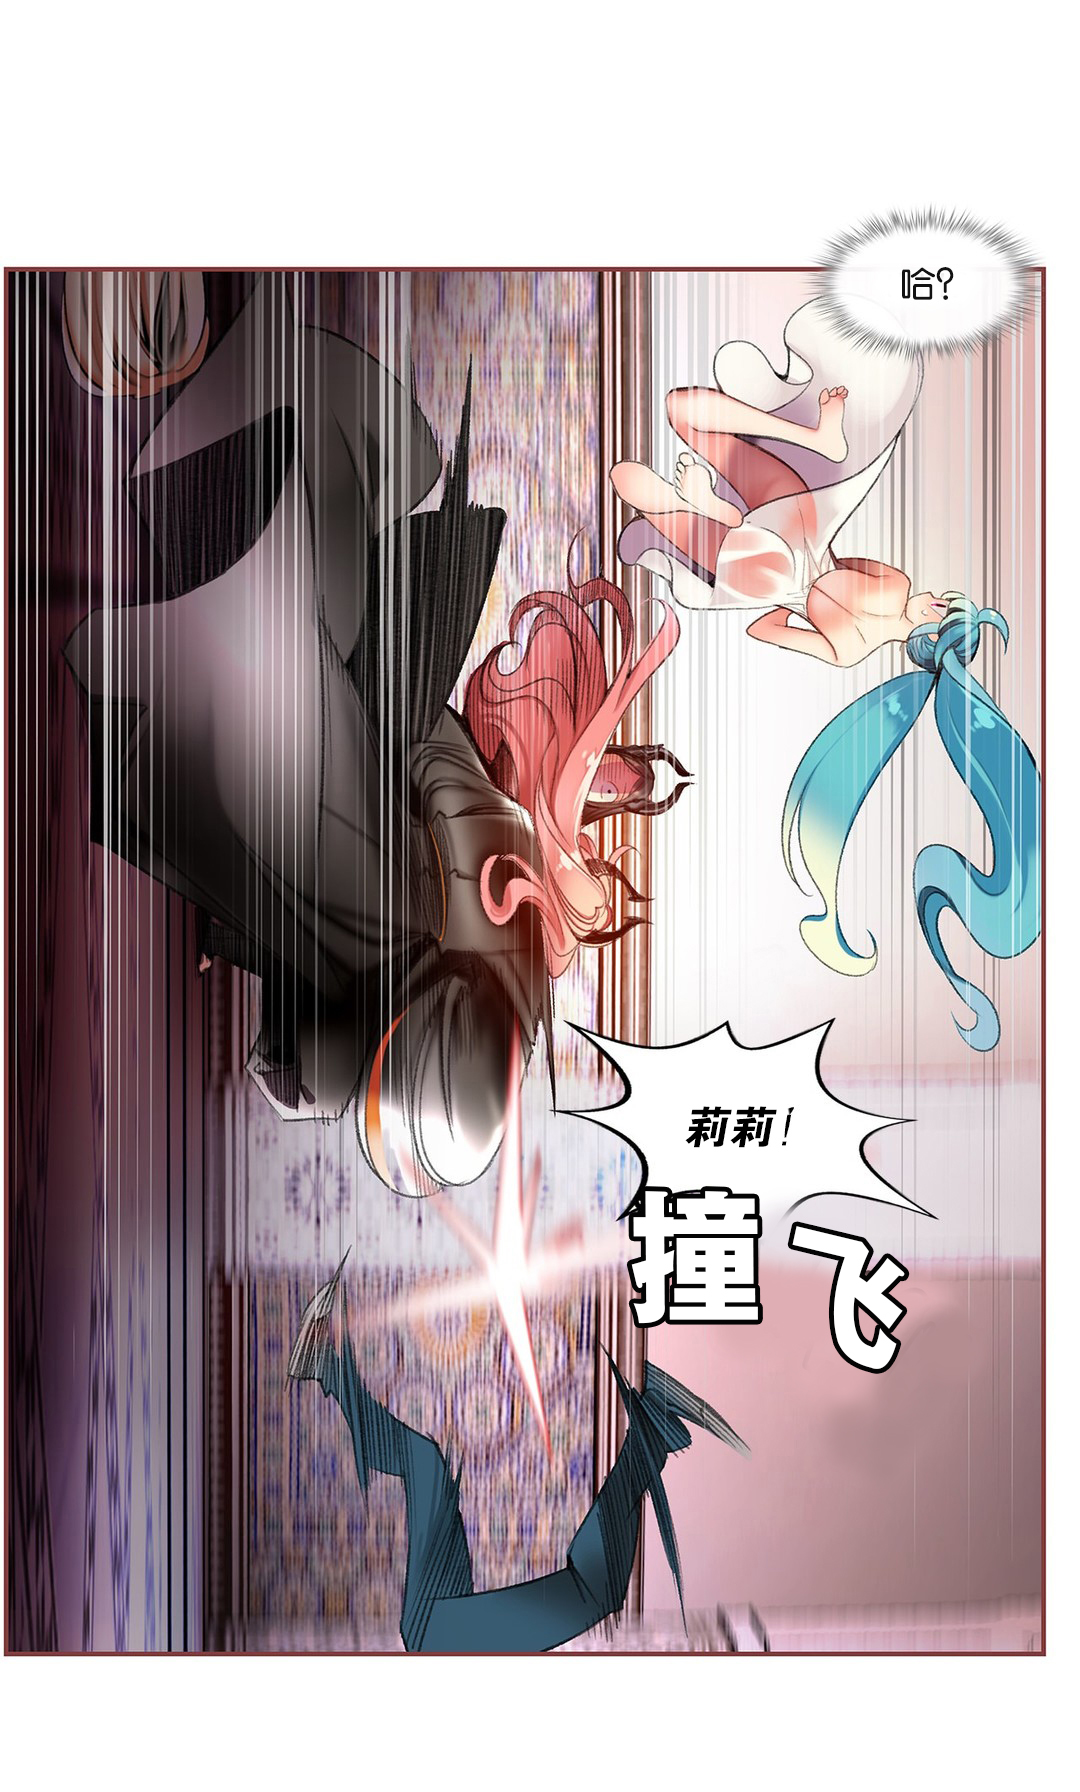 [Juder] Lilith`s Cord (第二季) Ch.61-72 [Chinese] [aaatwist个人汉化] [Ongoing] 